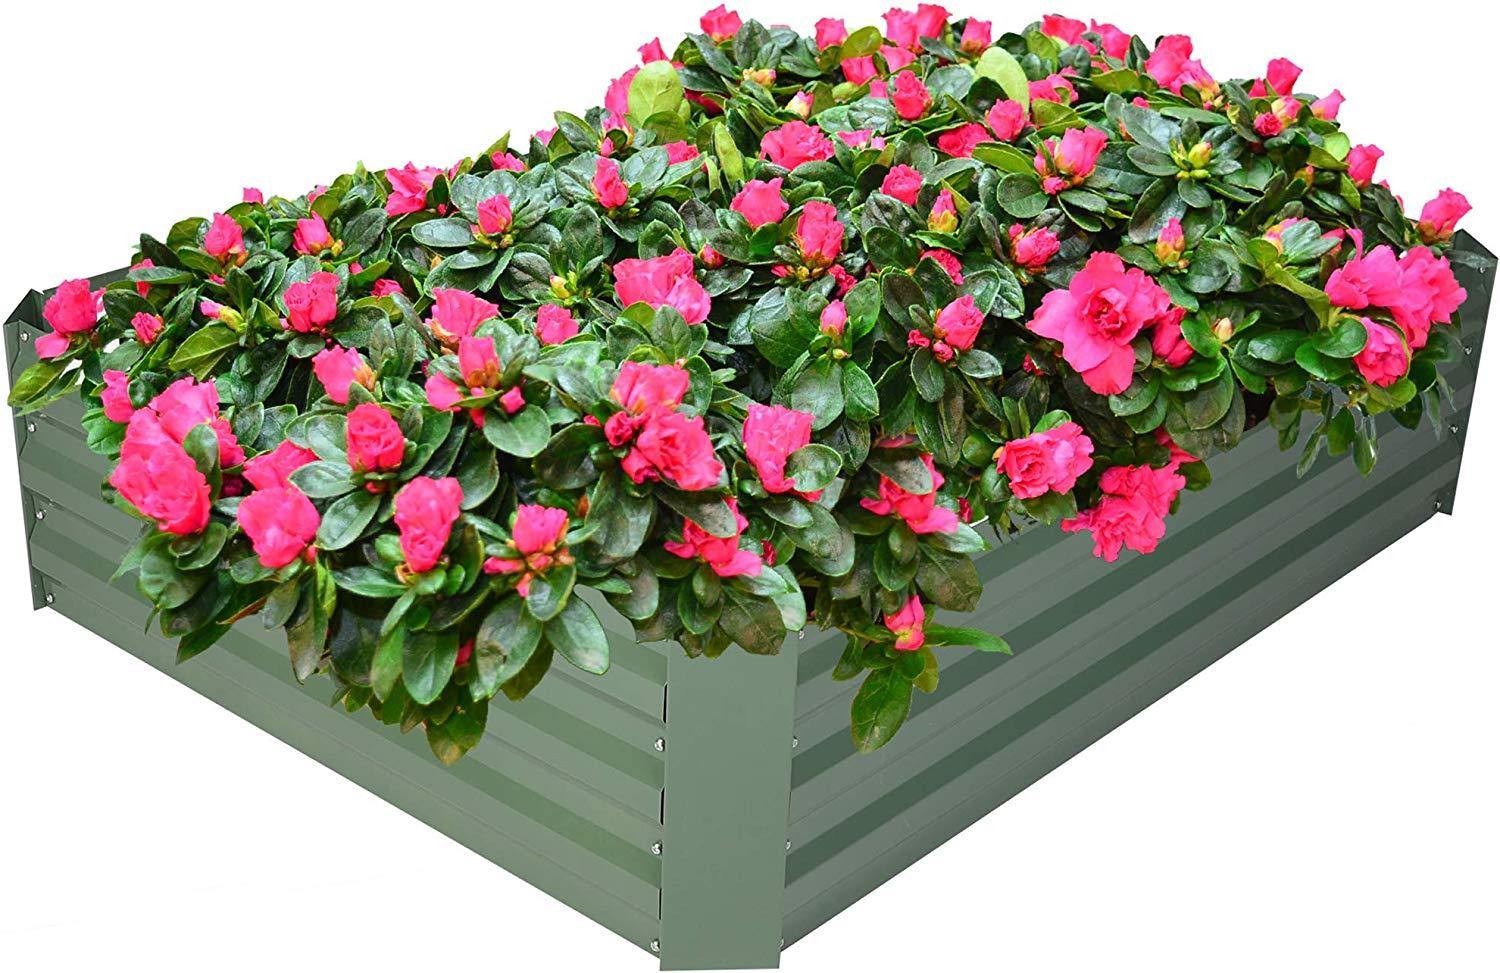 Raised Garden Bed Galvanized Planter Box Anti-Rust Coating Planting Vegetables Herbs and Flowers for Outdoor, Rectangle - Bosonshop